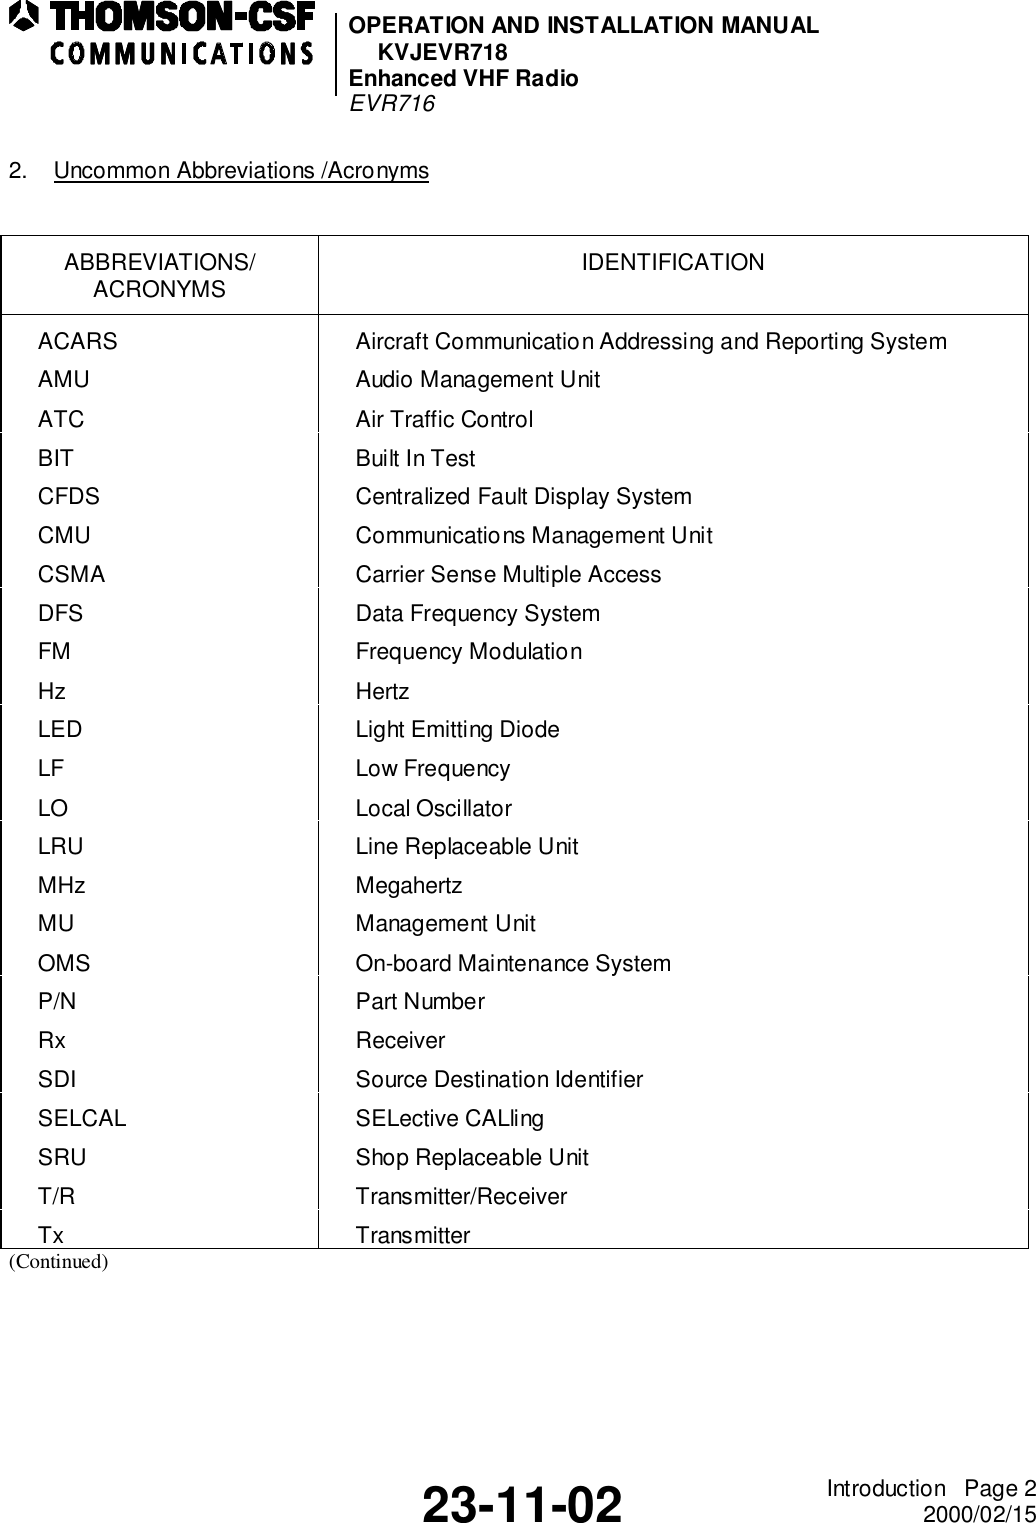 OPERATION AND INSTALLATION MANUALKVJEVR718Enhanced VHF RadioEVR71623-11-02 Introduction   Page 22000/02/152. Uncommon Abbreviations /AcronymsABBREVIATIONS/ACRONYMS IDENTIFICATIONACARS Aircraft Communication Addressing and Reporting SystemAMU Audio Management UnitATC Air Traffic ControlBIT Built In TestCFDS Centralized Fault Display SystemCMU Communications Management UnitCSMA Carrier Sense Multiple AccessDFS Data Frequency SystemFM Frequency ModulationHz HertzLED Light Emitting DiodeLF Low FrequencyLO Local OscillatorLRU Line Replaceable UnitMHz MegahertzMU Management UnitOMS On-board Maintenance SystemP/N Part NumberRx ReceiverSDI Source Destination IdentifierSELCAL SELective CALlingSRU Shop Replaceable UnitT/R Transmitter/ReceiverTx Transmitter(Continued)